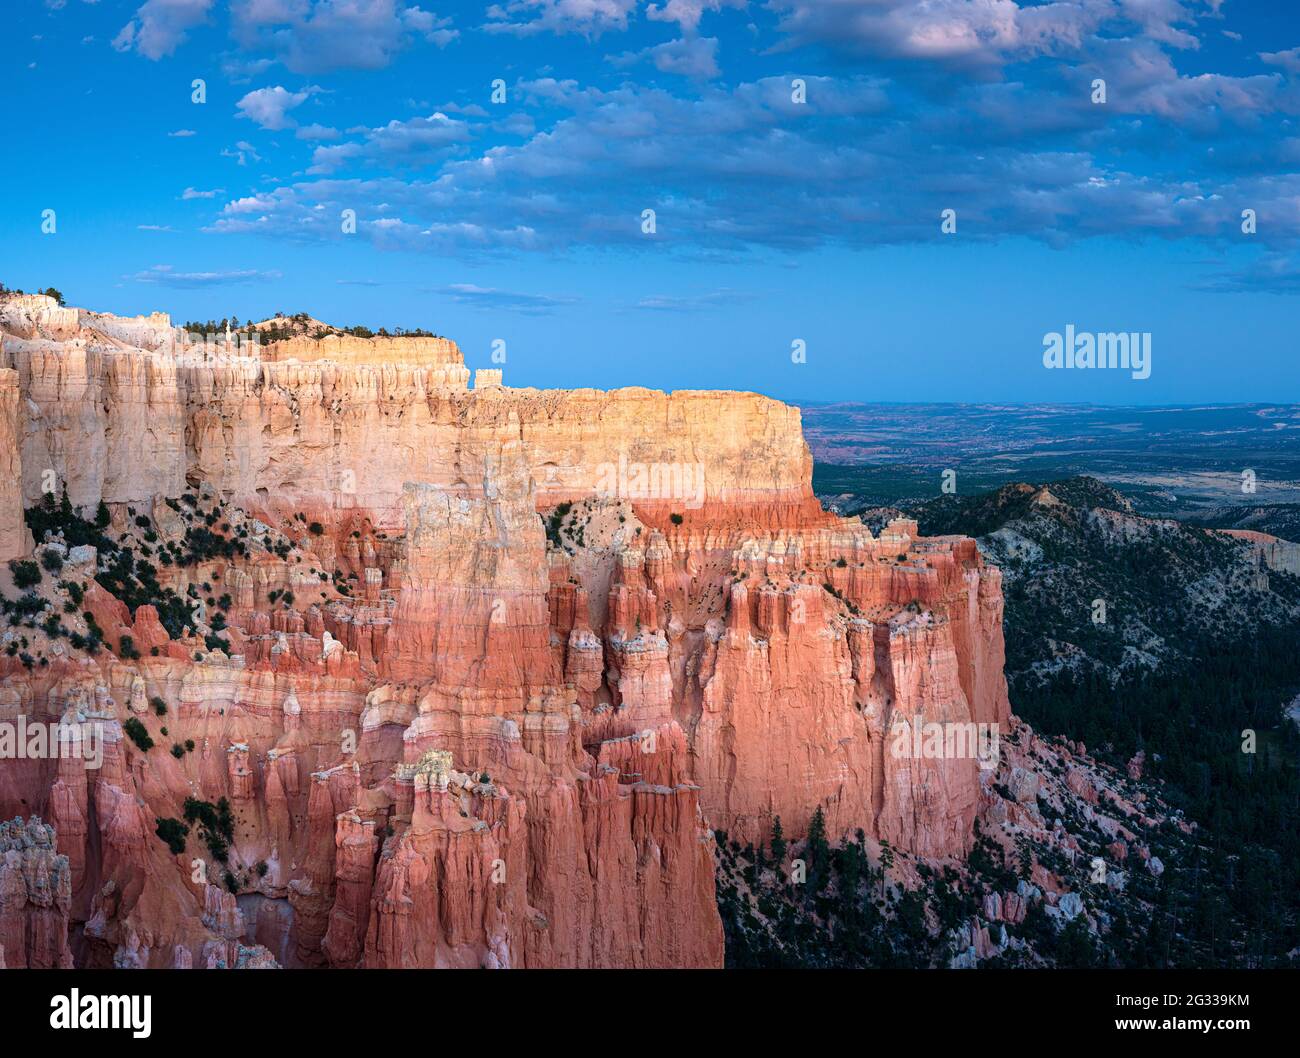 BRYCE, UTAH - CIRCA AUGUST 2020: View of Hoodoos and rock formations in Bryce Canyon National Park, Utah. Stock Photo